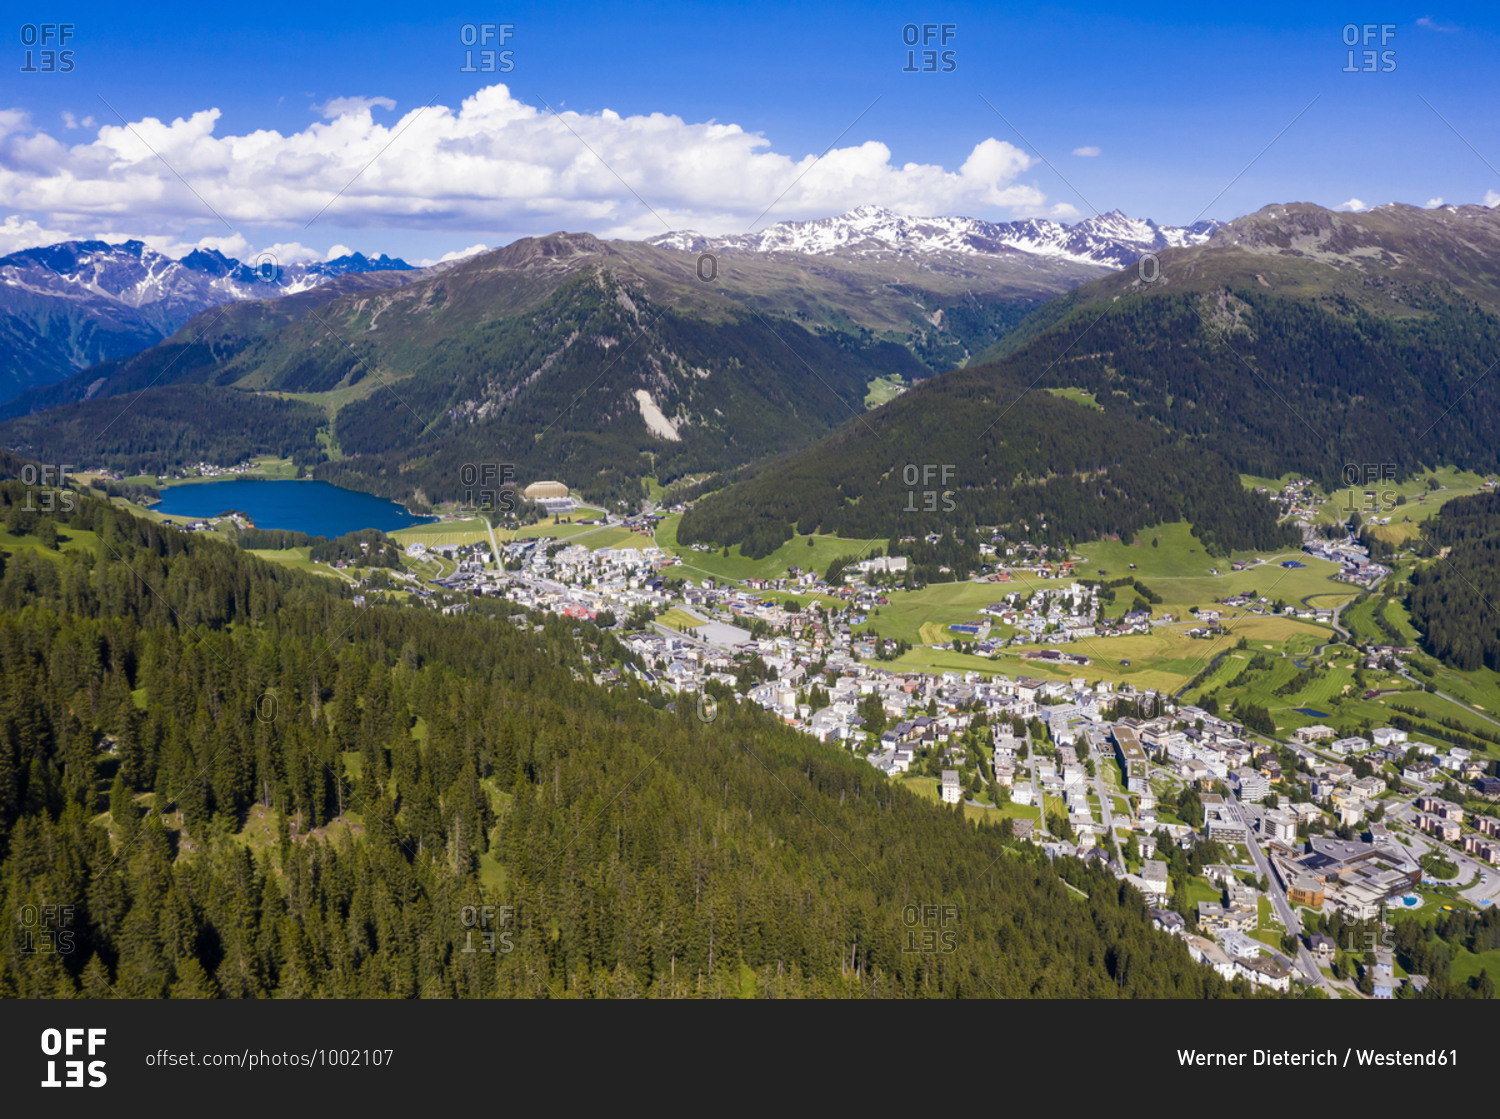 Switzerland- Canton of Grisons- Davos- Aerial view of alpine
town in summer stock photo - OFFSET